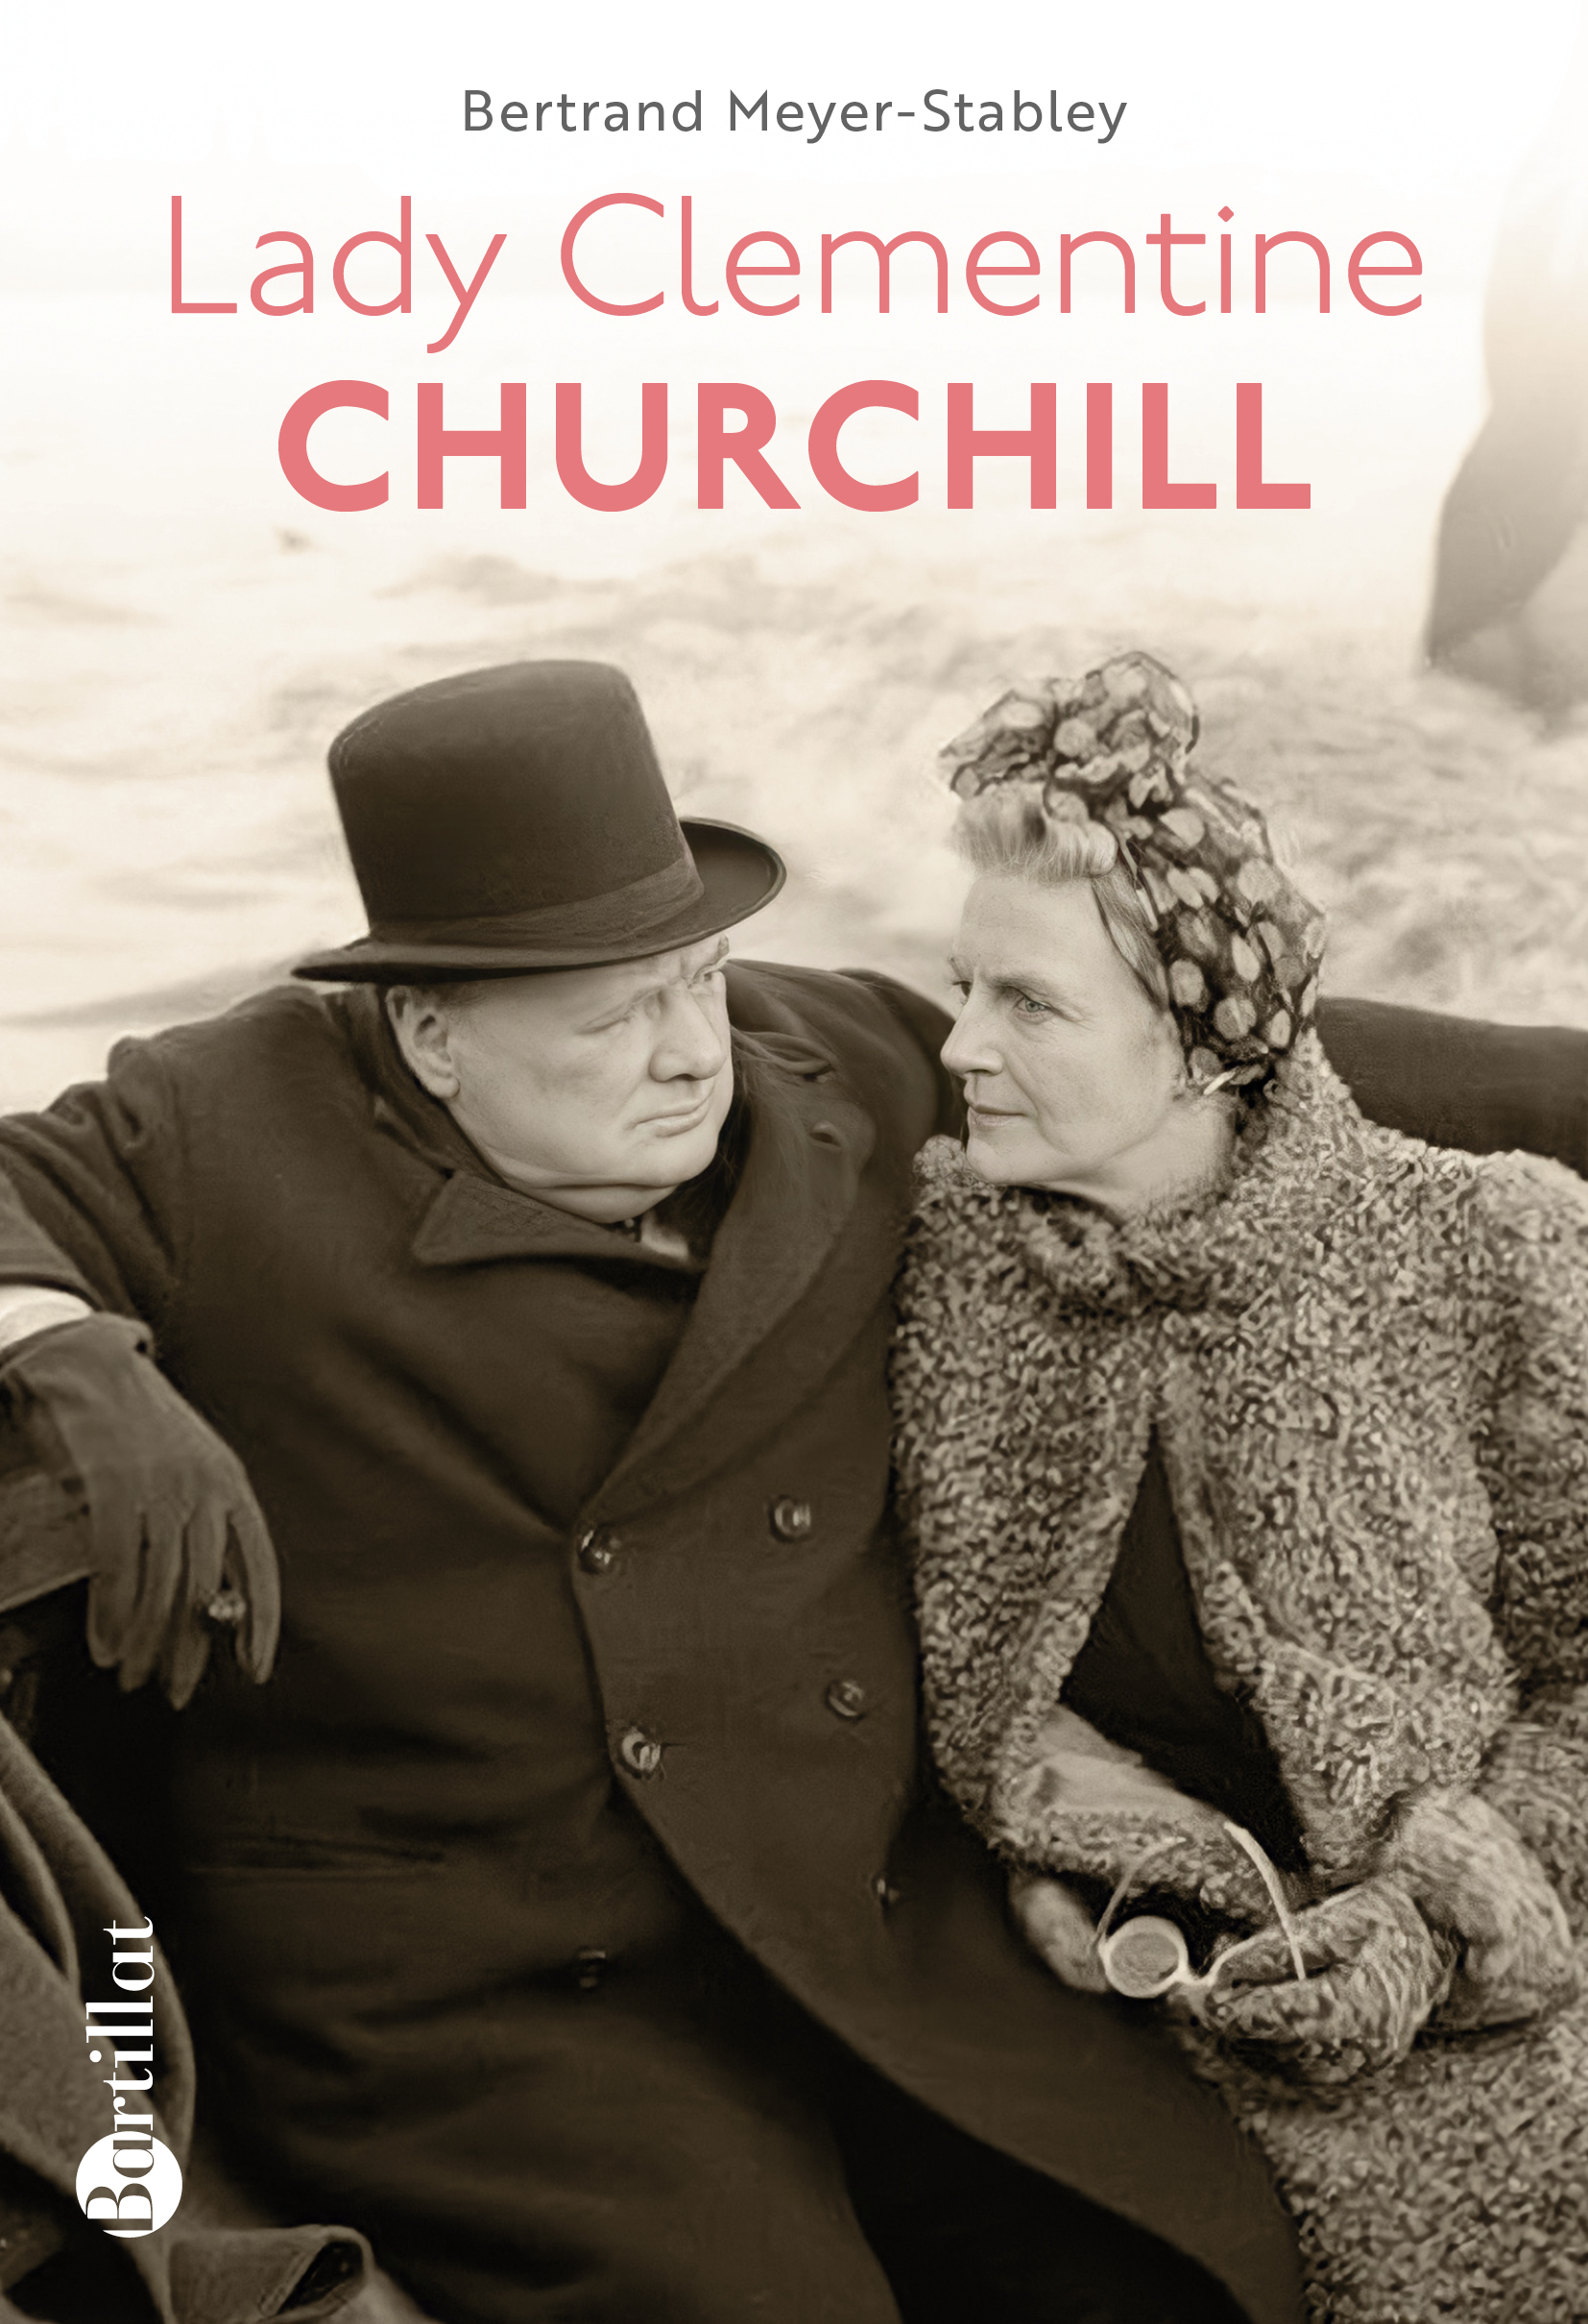 Couverture Lady Clementine Churchill - Bertrand Meyer-Stabley